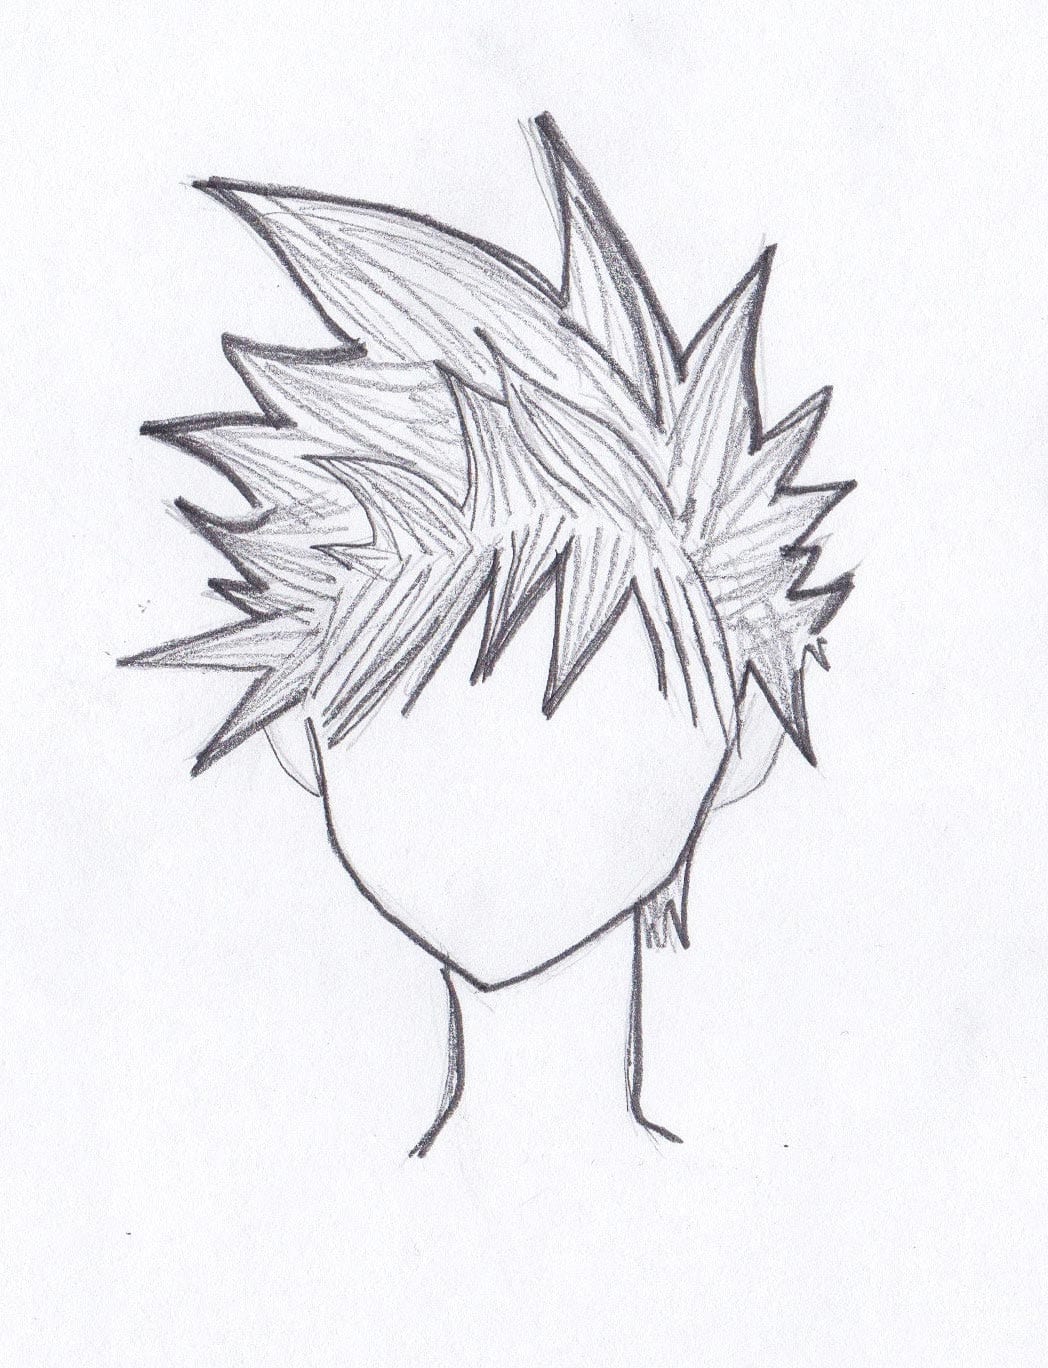 The Complete Guide On How To Draw Anime Hair Corel Painter Step 7 cleaning up the drawing anime boy outline drawing. to draw anime hair